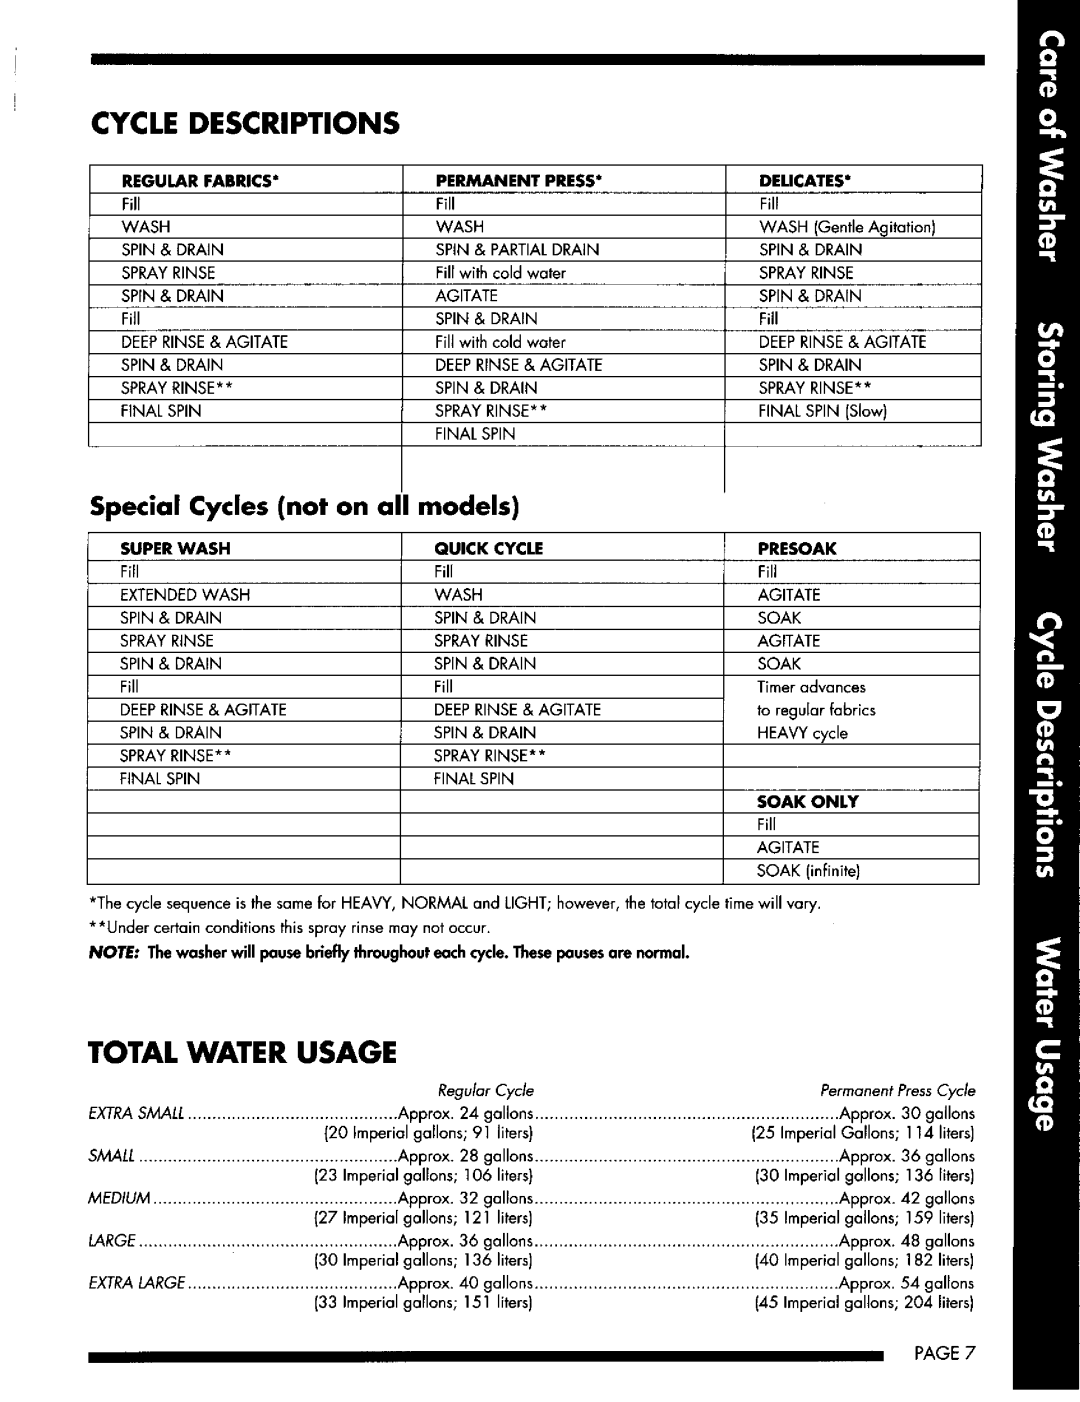 Maytag LAT8624 Cycle Descriptions, Special Cycles not on all models, Total Water Usage, Pe Rma Nent P Ress, Delicates 